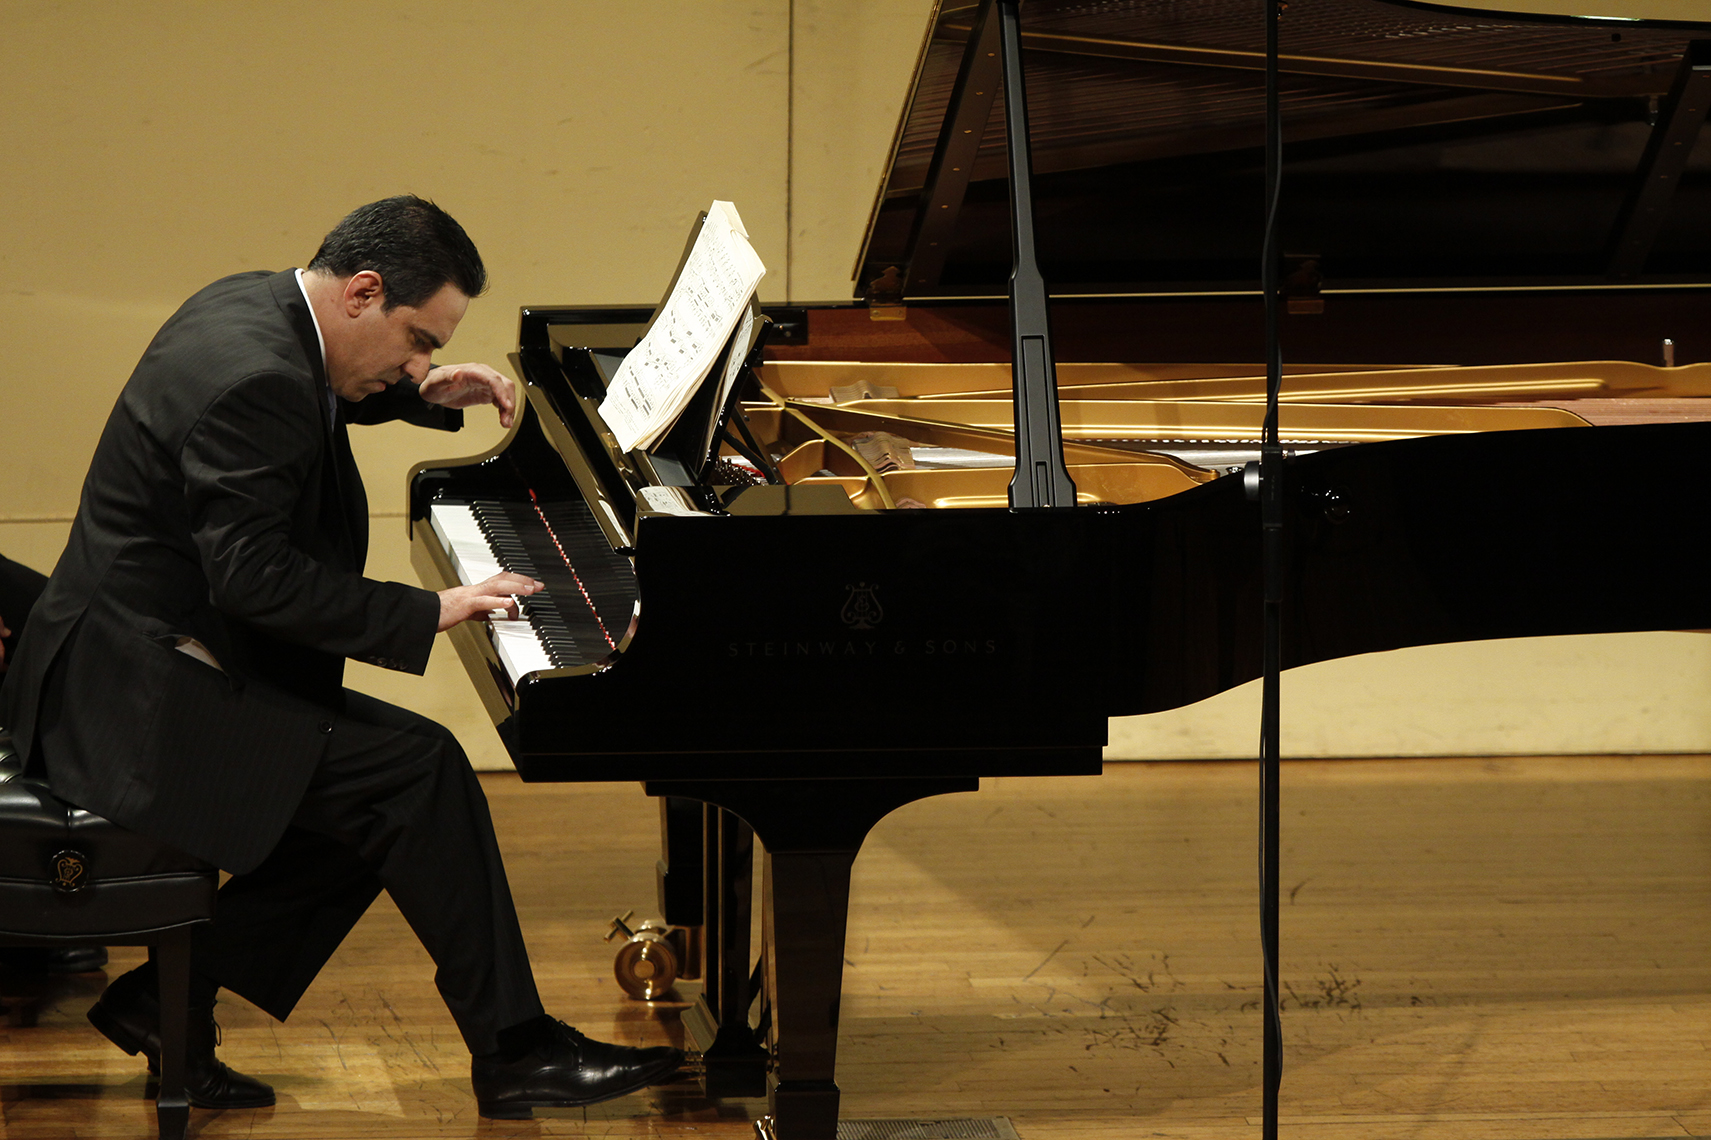 Jorge Zamora, a telecommunications distribution manager from Mexico, competes in the semi-final round of the Sixth  International Piano Competition for Outstanding Amateurs hosted by the Van Cliburn Foundation in Fort Worth, Texas, Friday, May 27, 2011. (Van Cliburn Foundation/Rodger Mallison)